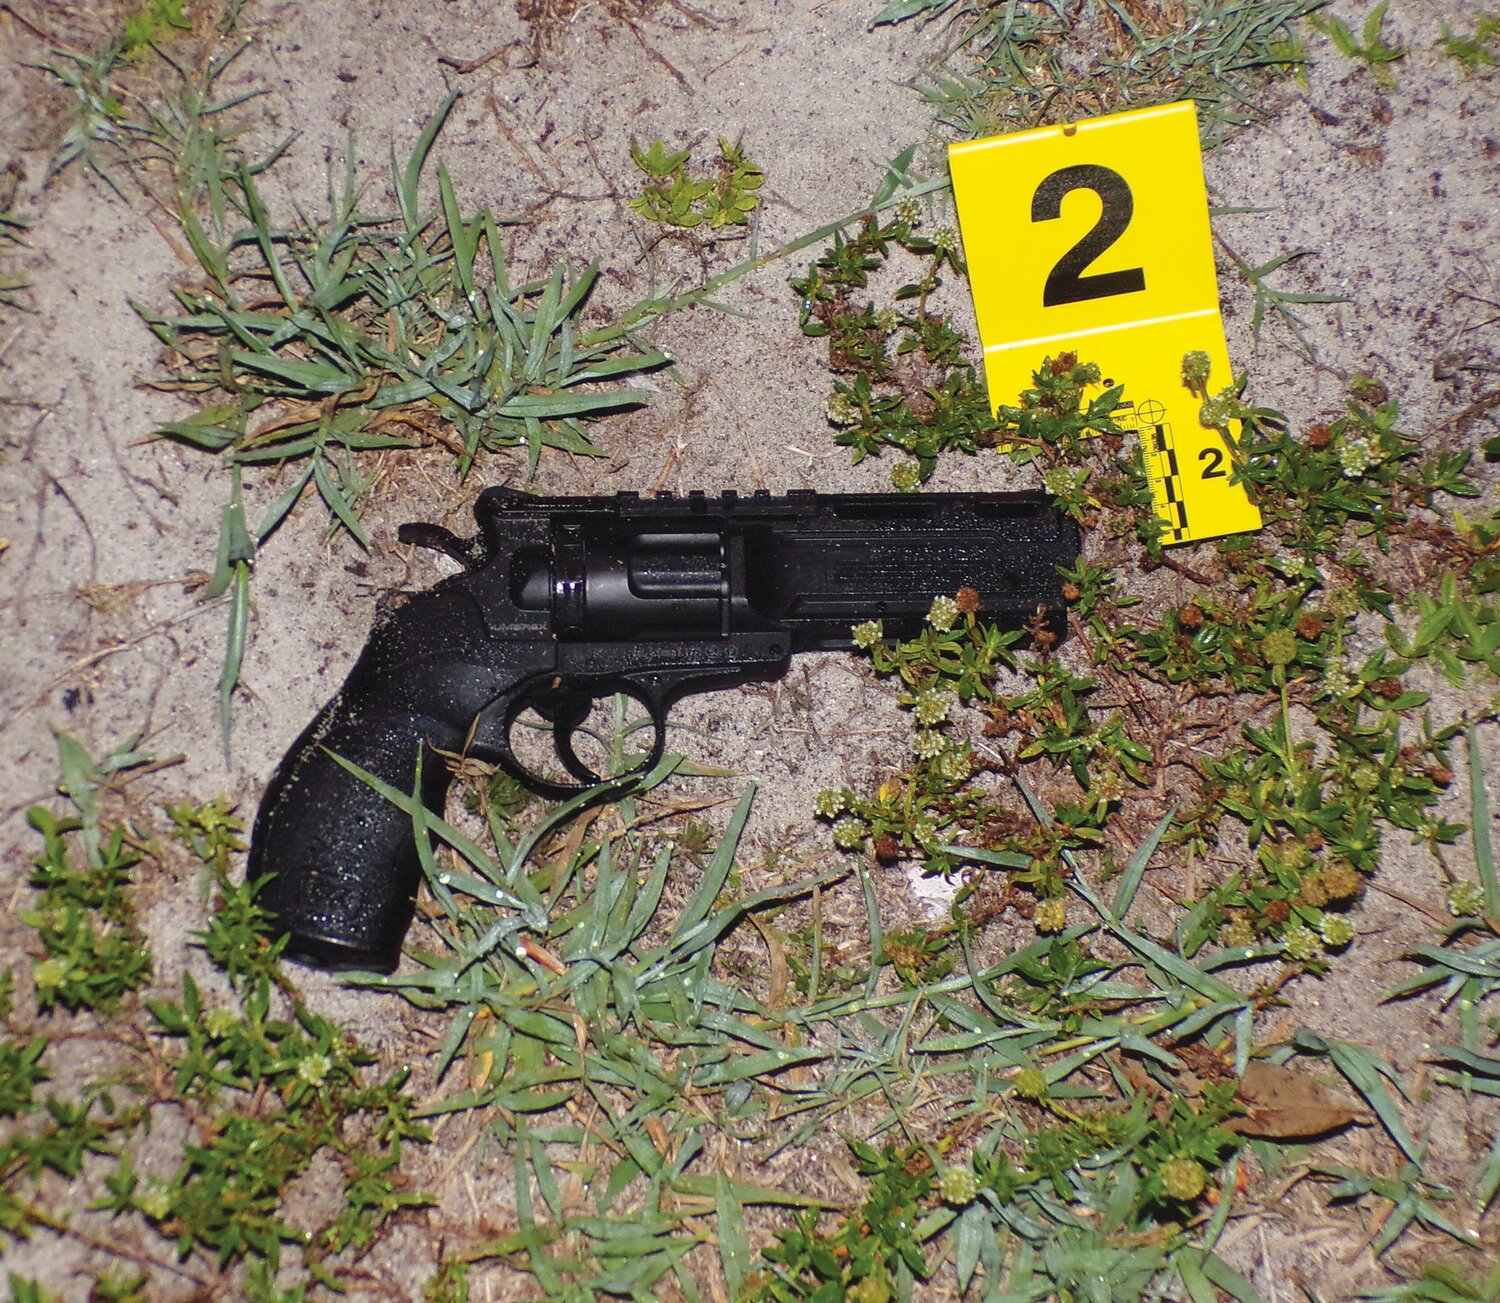 Police recovered this BB gun allegedly used in an attempted armed robbery.